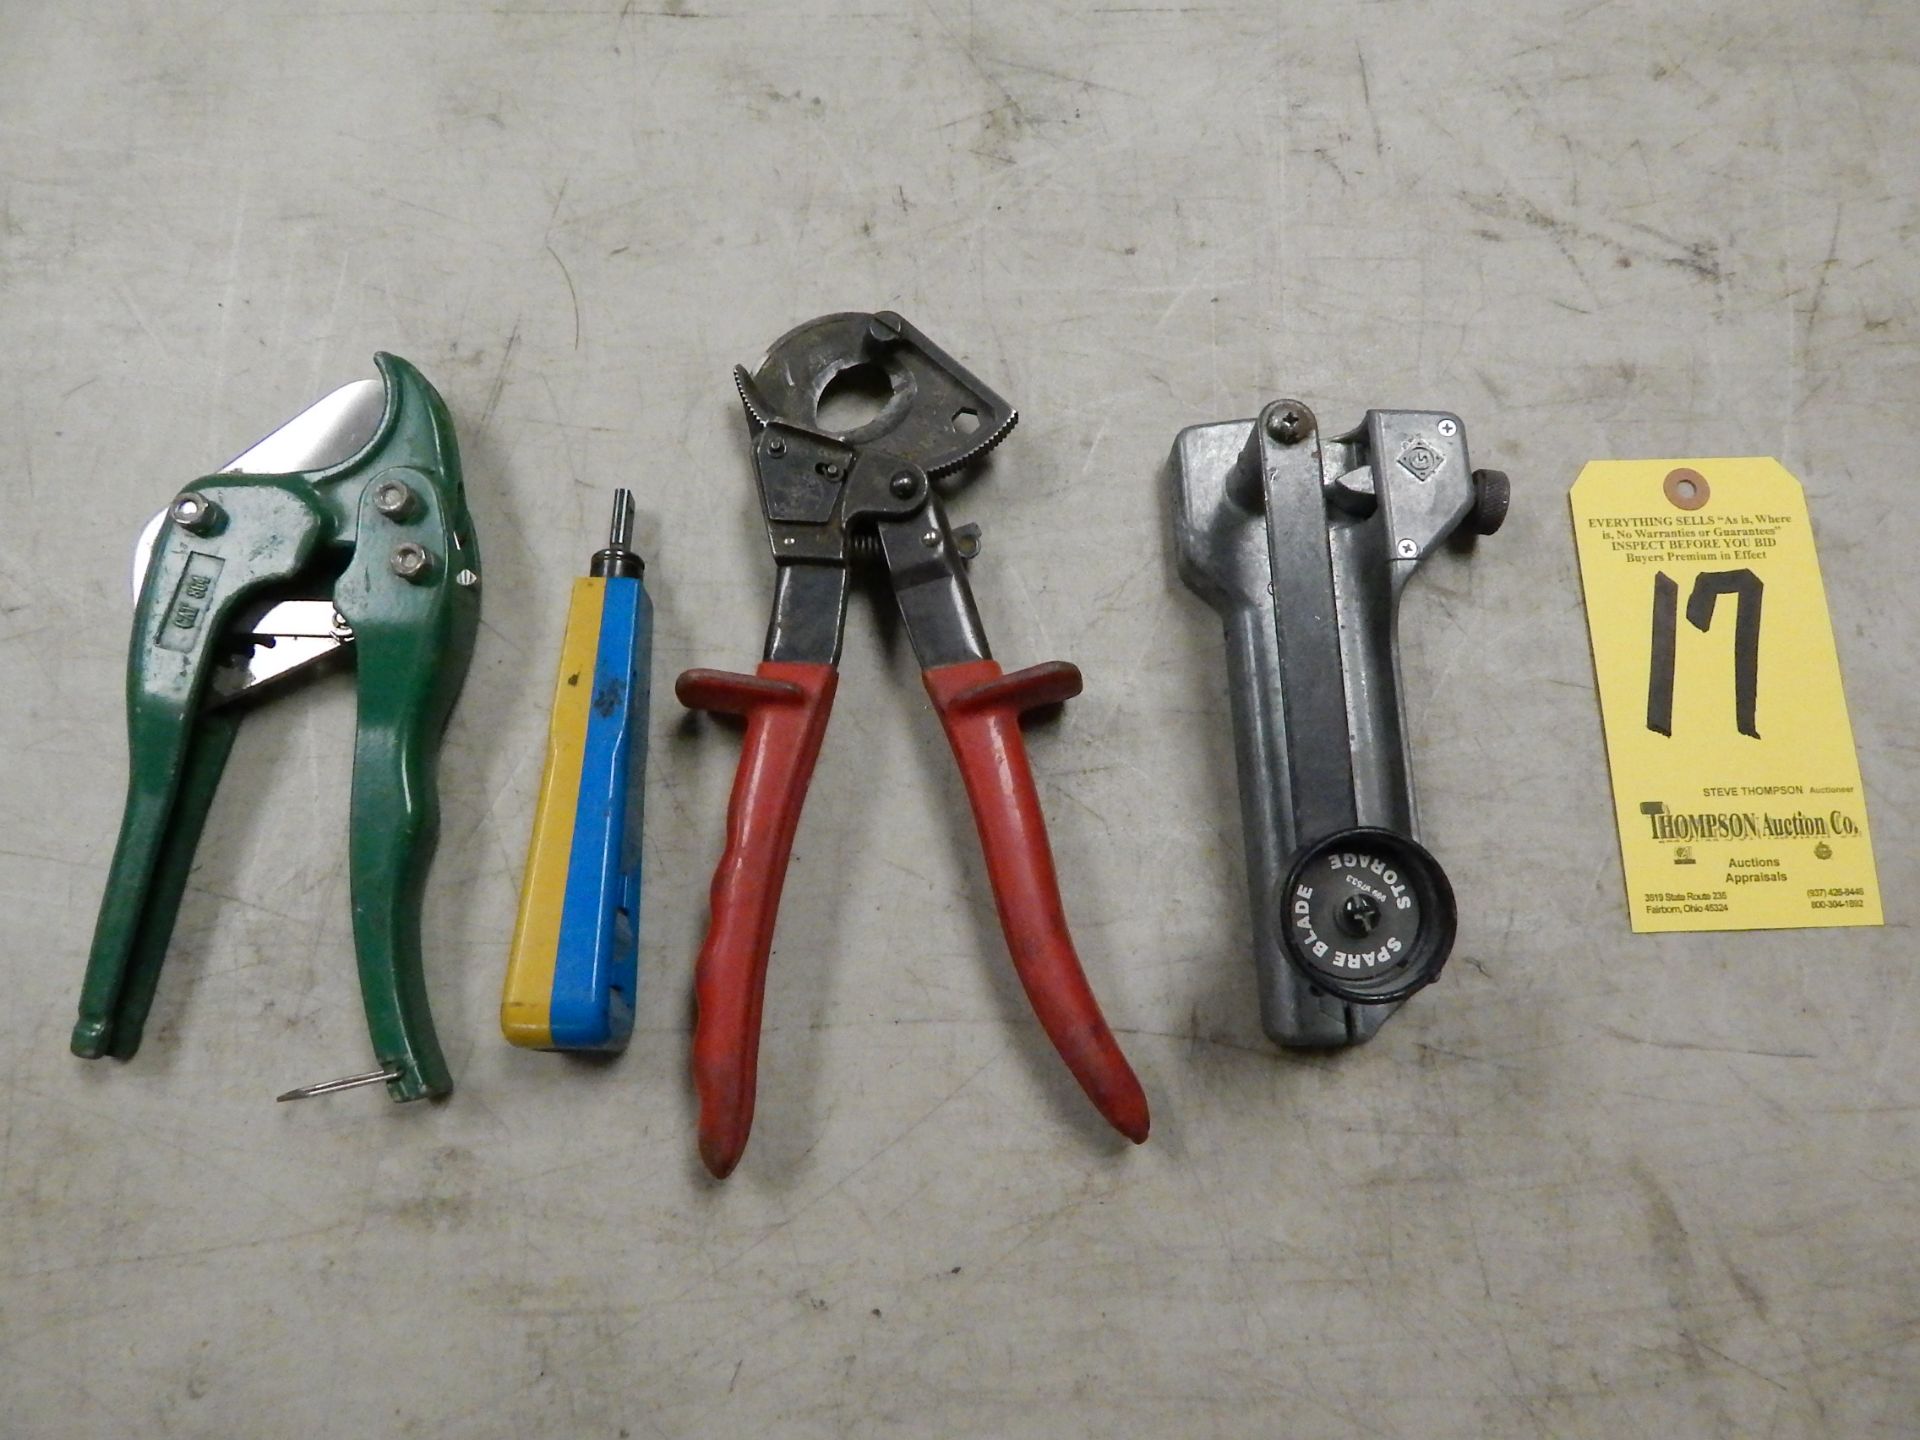 Klein Cable Cutter, Greenlee PVC Cutter, and Greenlee Flexible Conduit Cutter